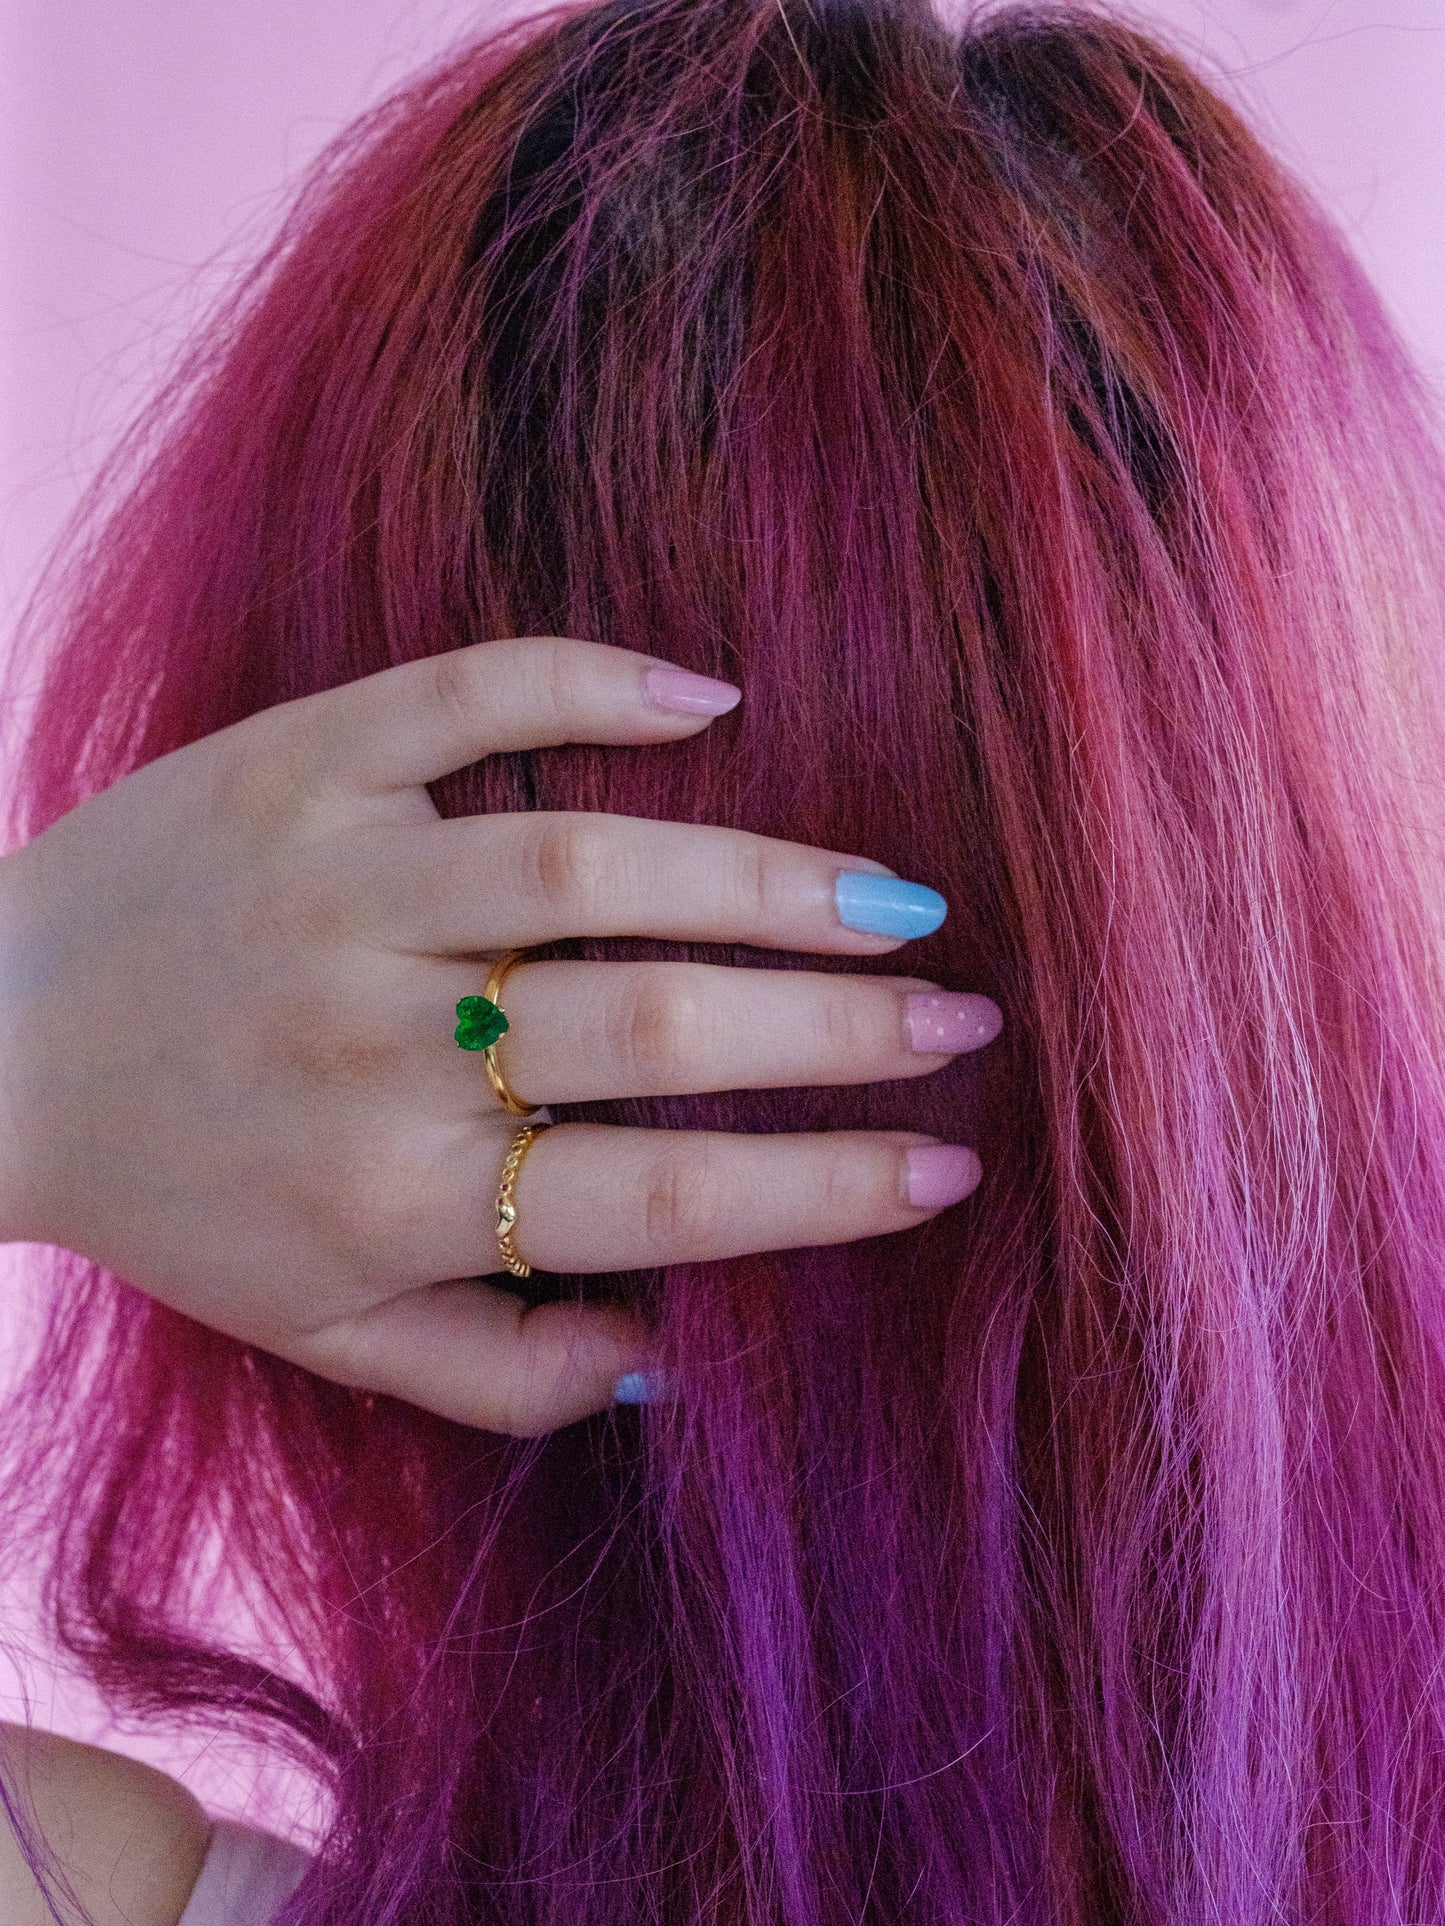 Woman's hand on the back of her head, wearing two gold rings. One with a small gold heart centre and the other with a green heart gem stone